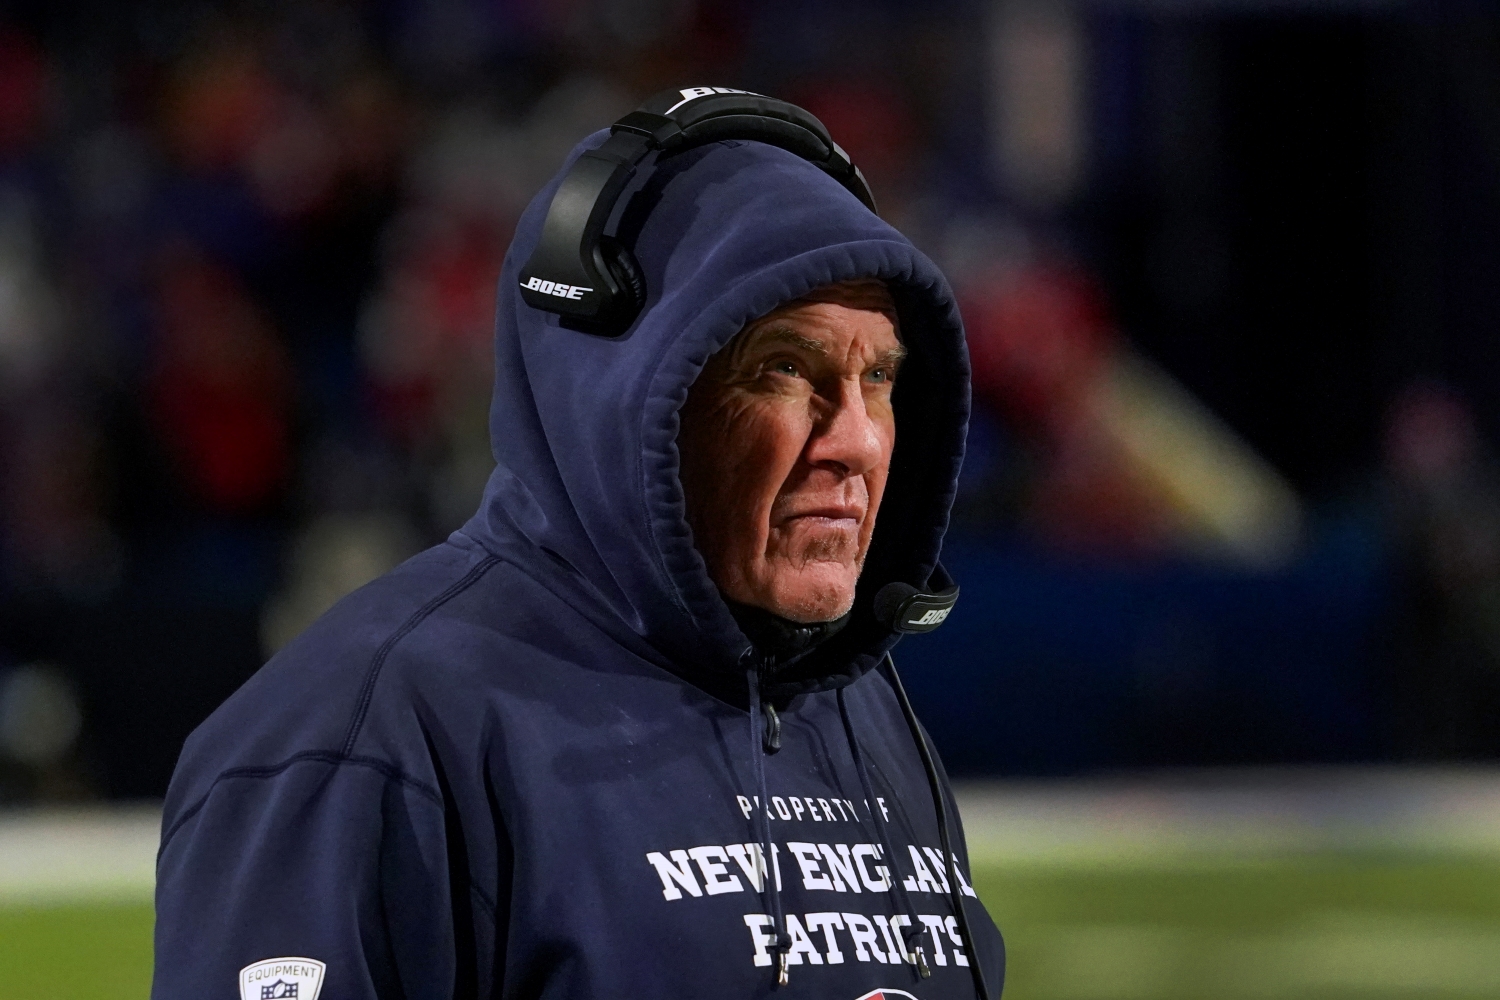 Bill Belichick looks up during a game between the Patriots and the Bills.